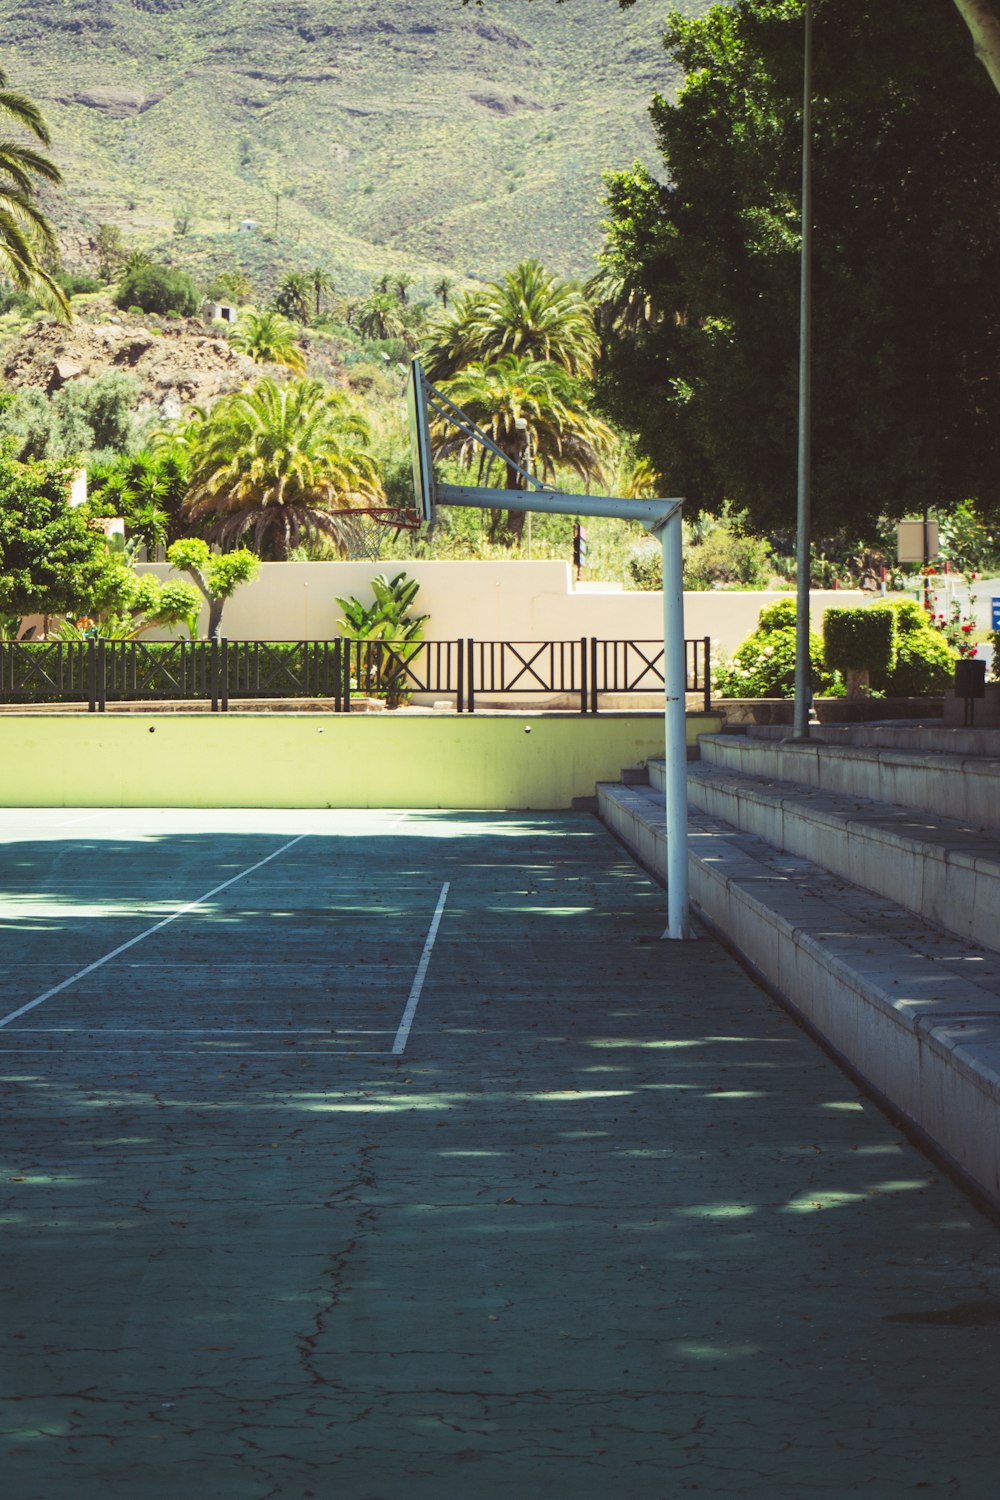 a tennis court with a fence